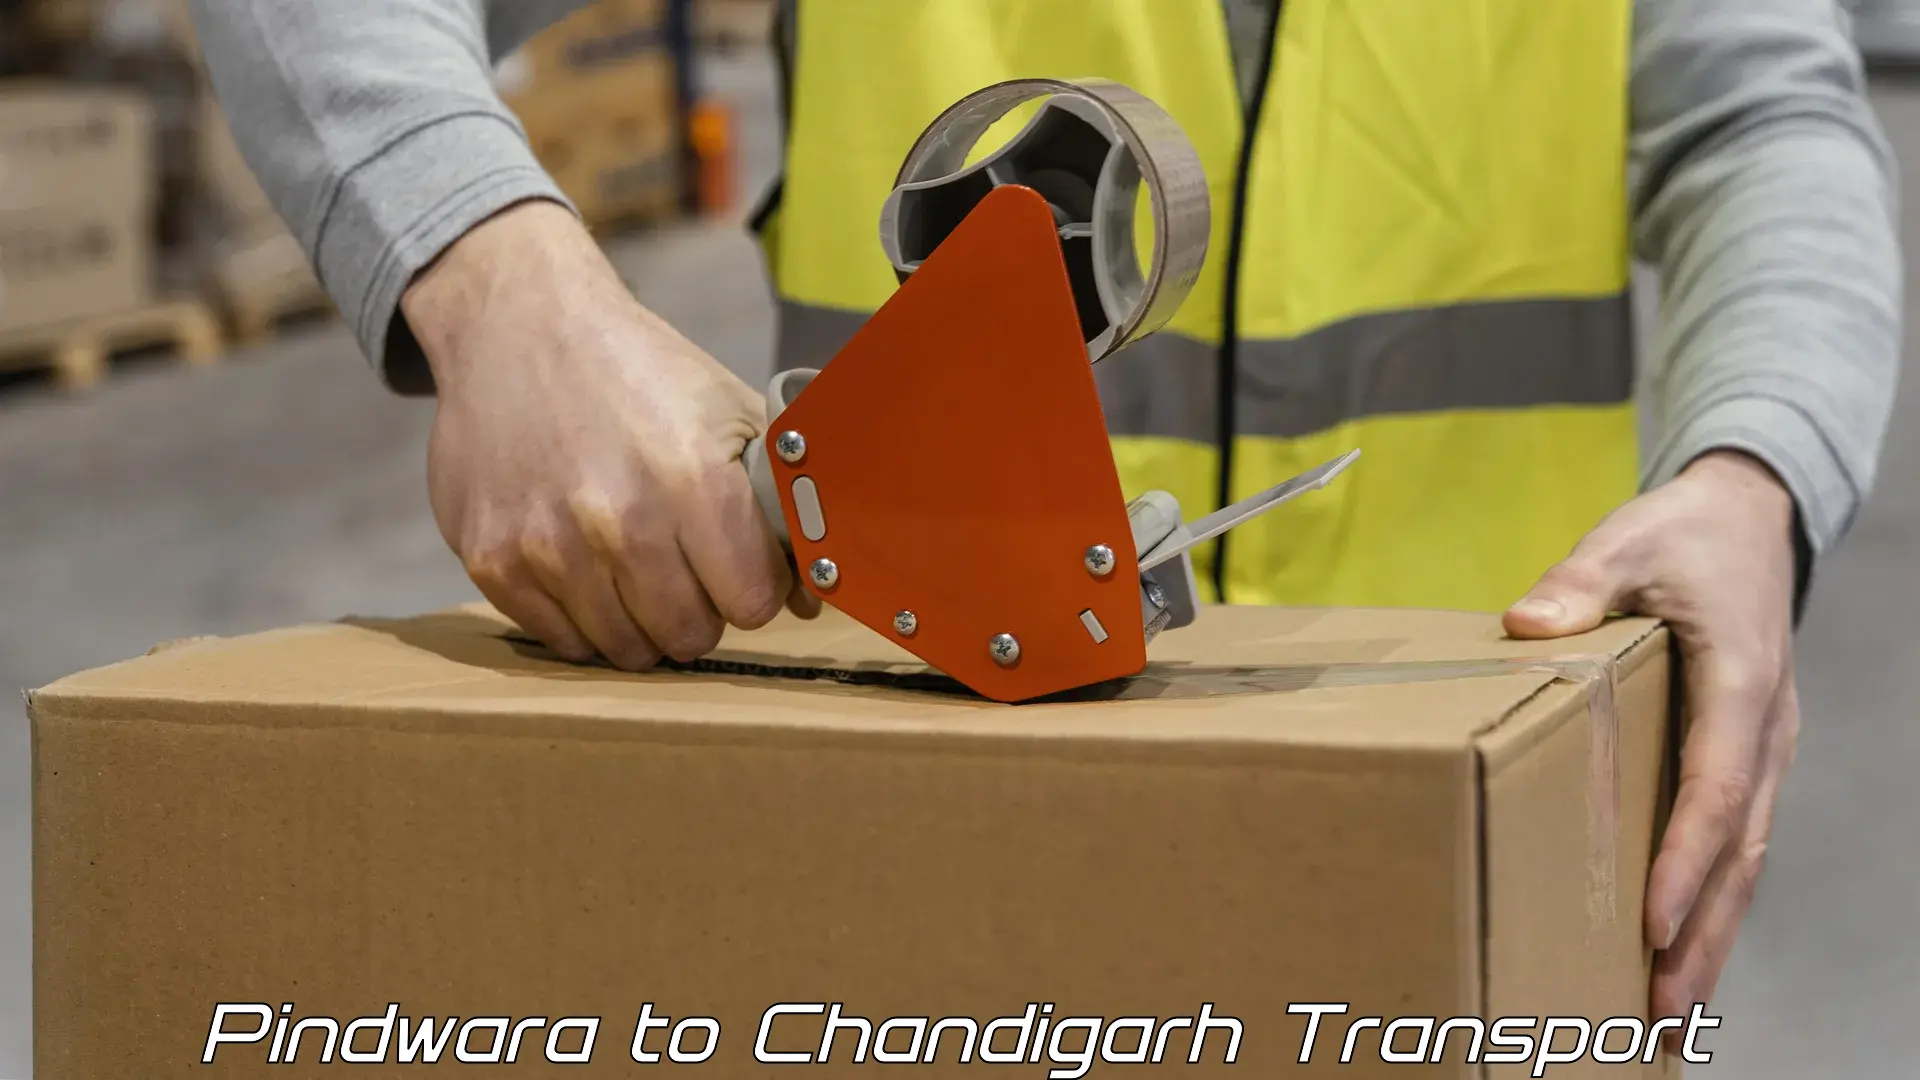 Commercial transport service Pindwara to Chandigarh